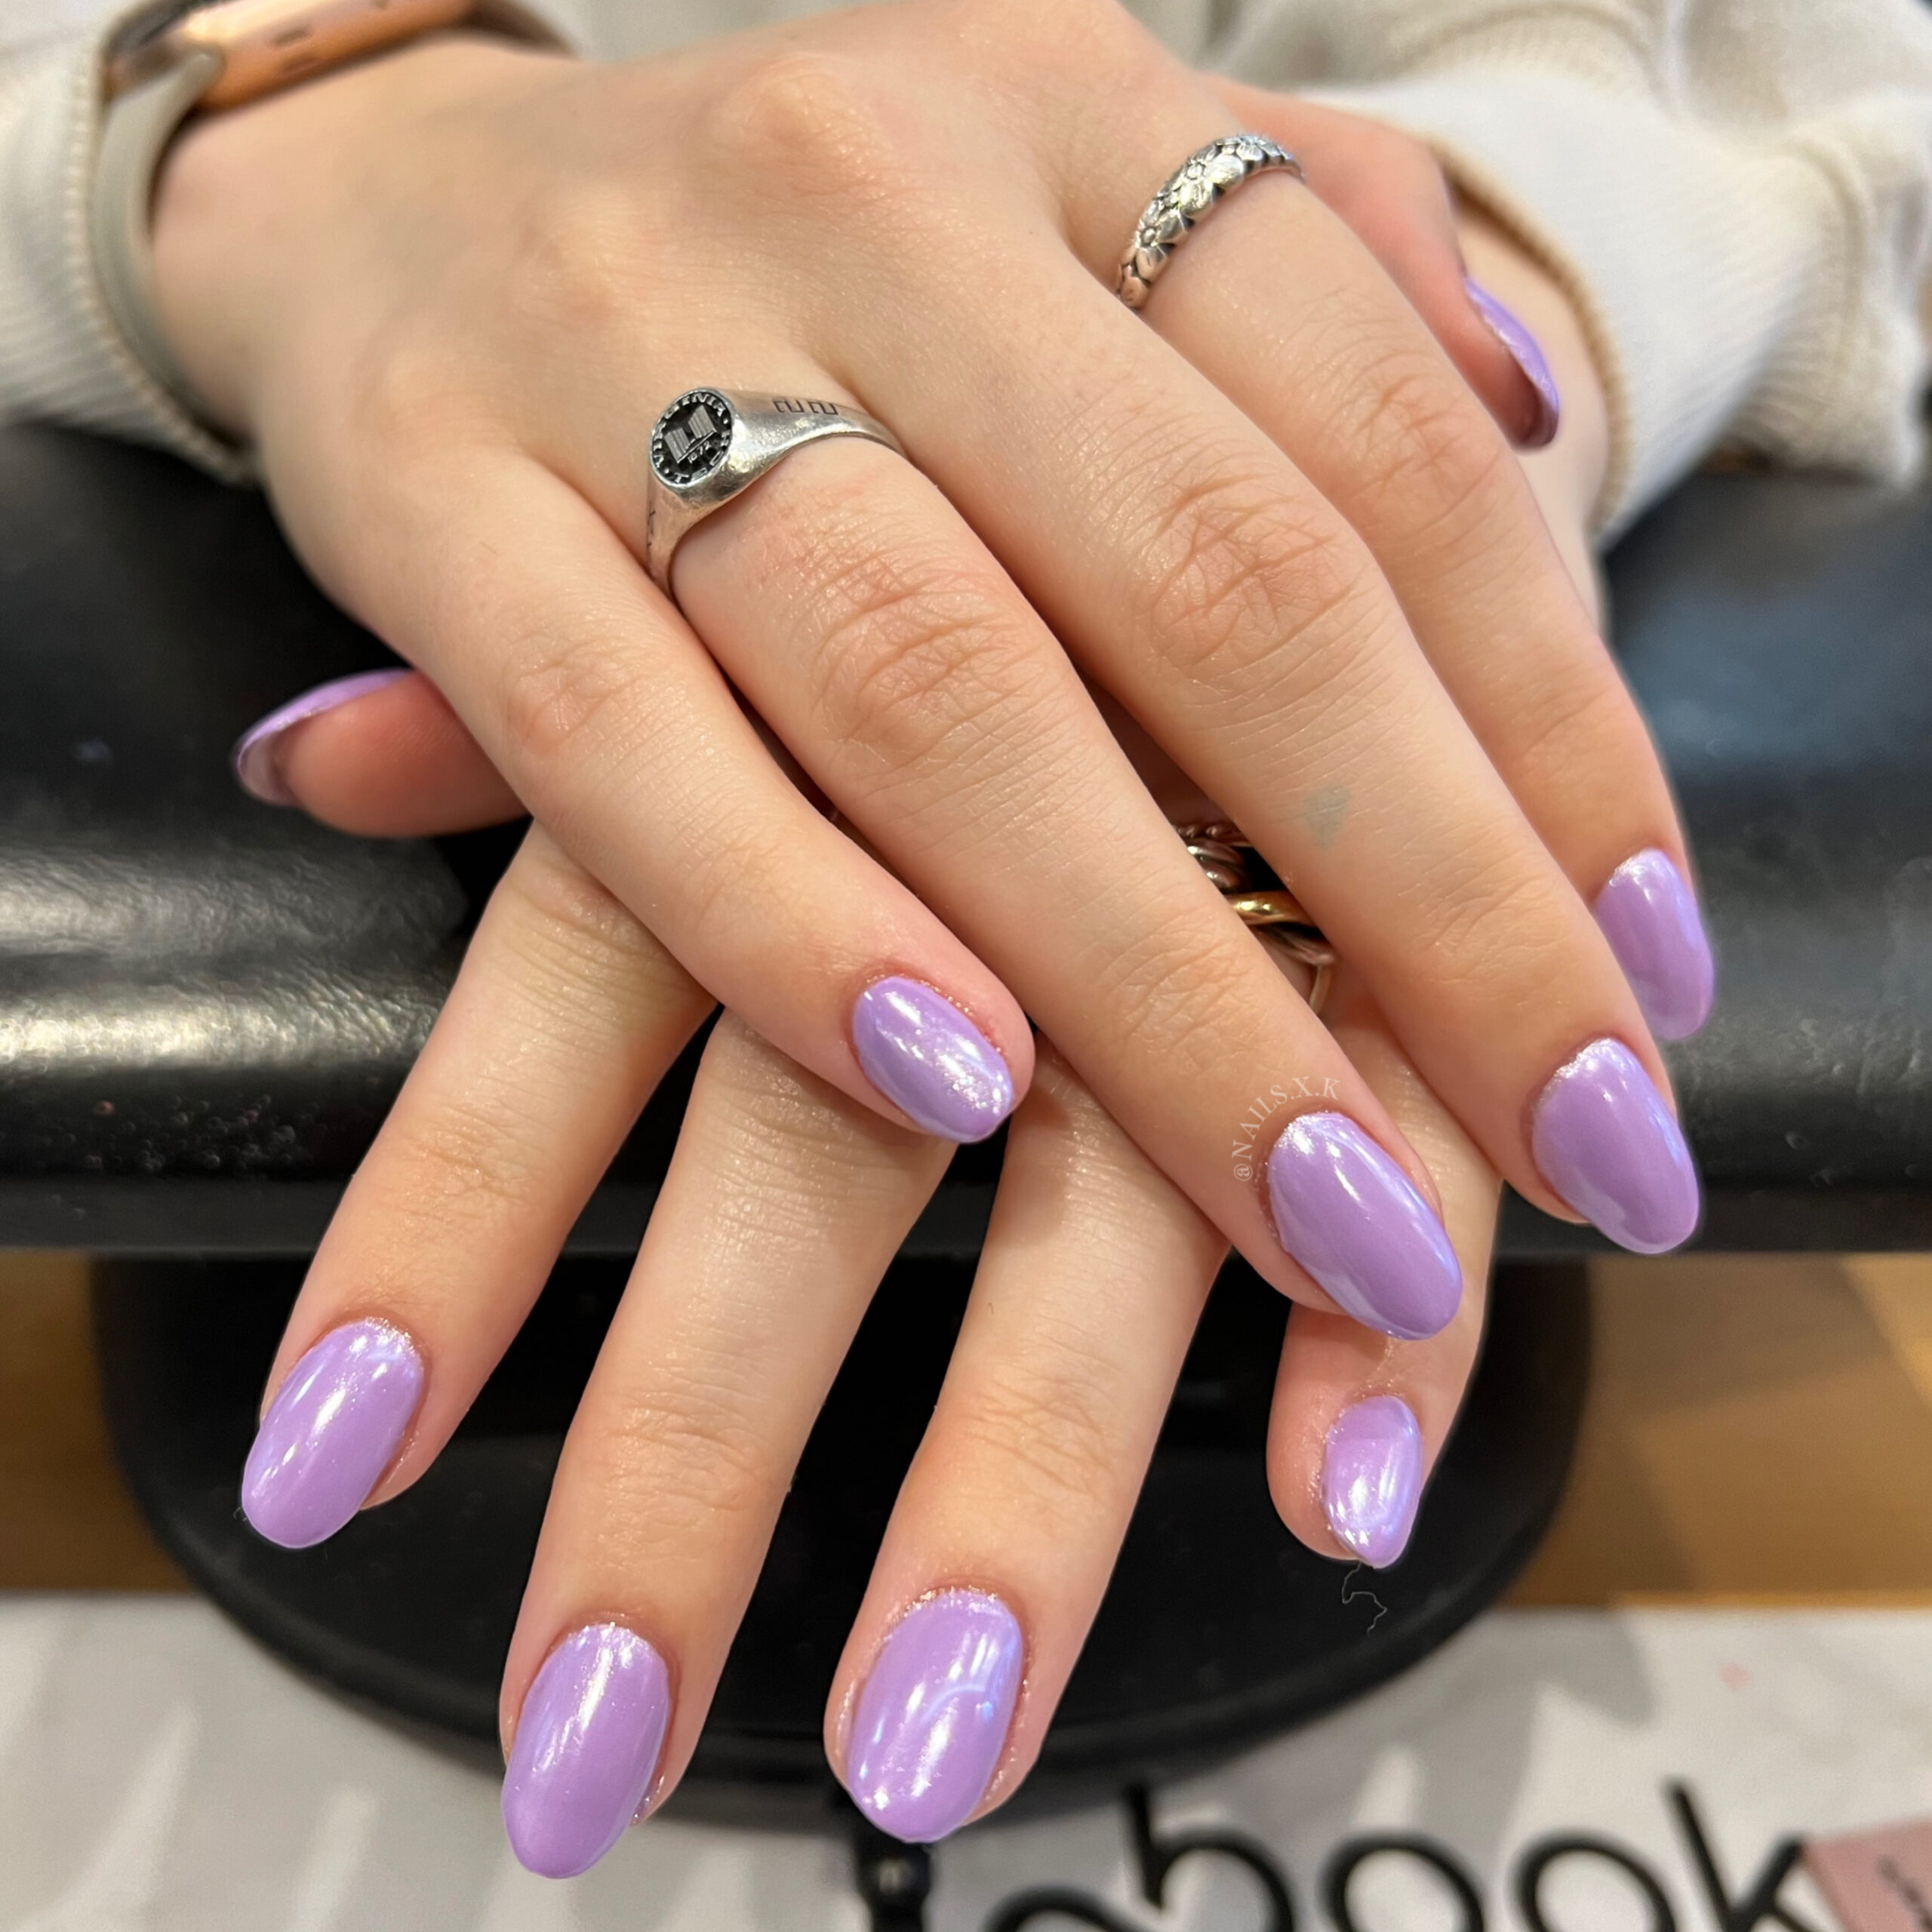 Acrylic fill with a lavender color and pearl chrome on top. Nails by K